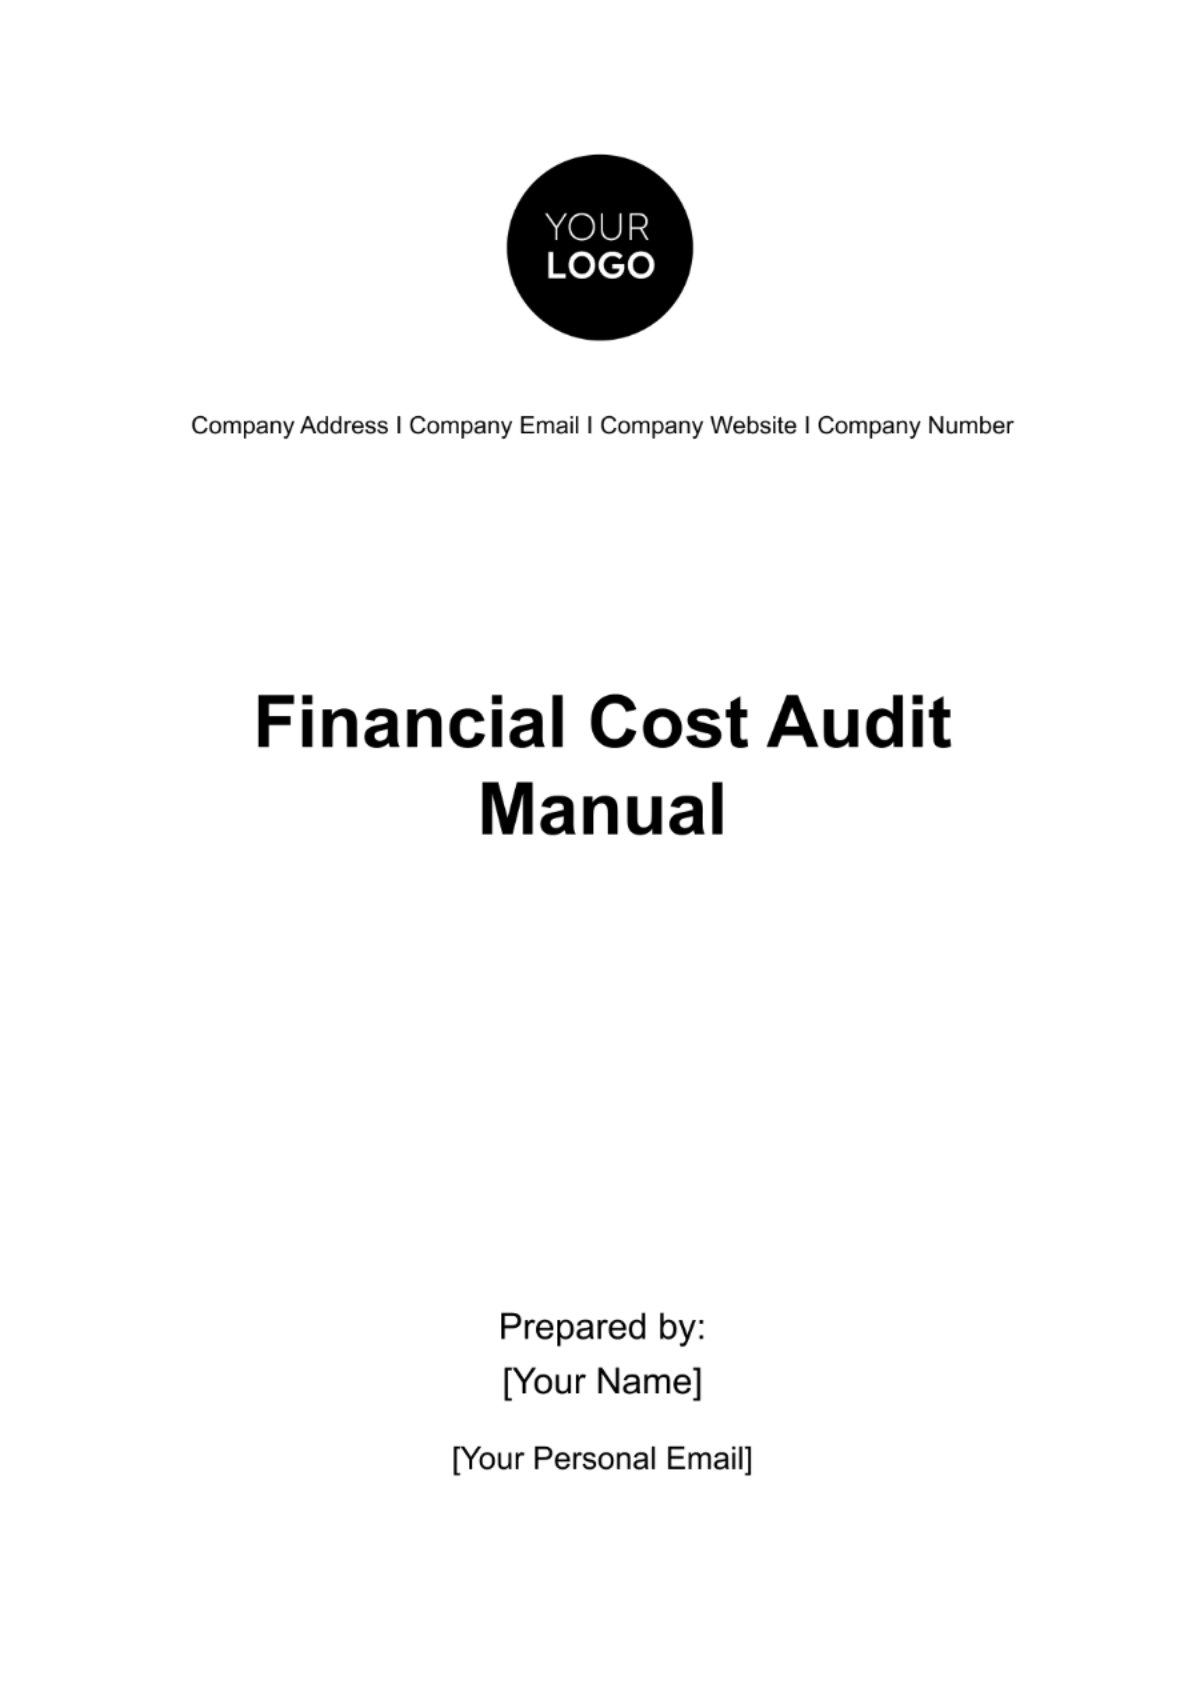 Financial Cost Audit Manual Template